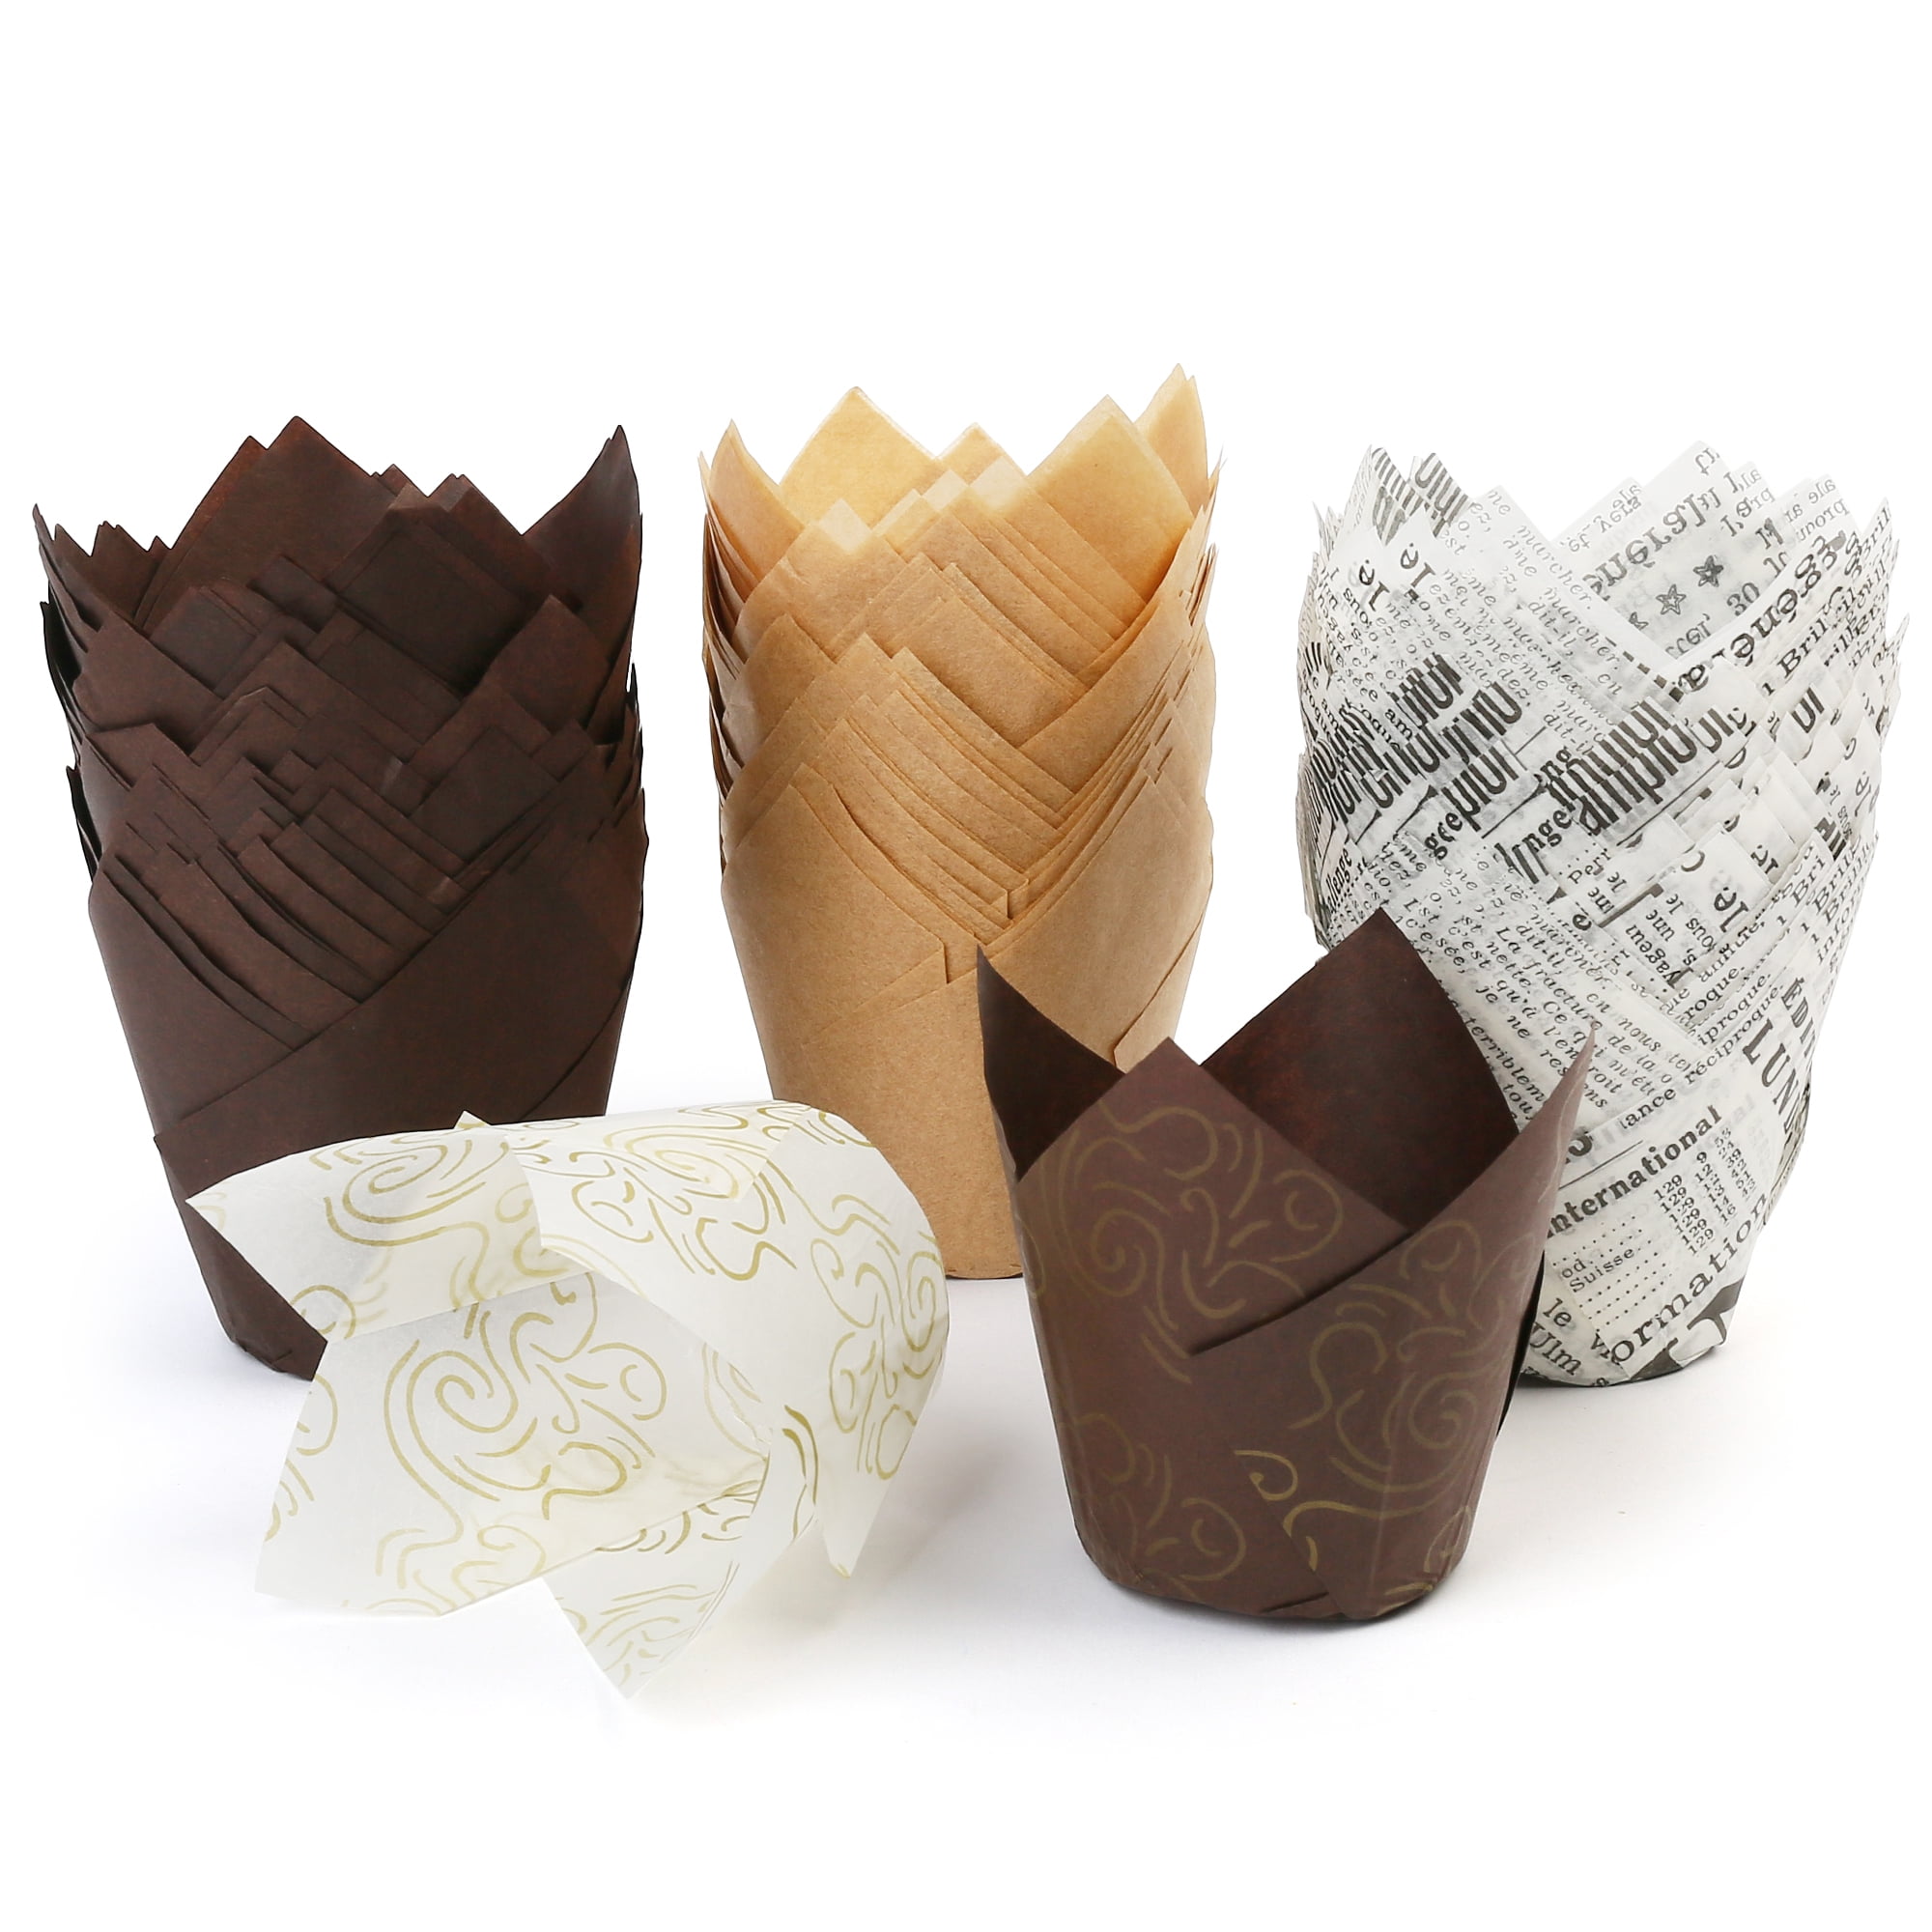 Lotfancy 500pcs Small Cupcake Wrappers, Mini Cupcake Liners, Brown, Women's, Size: 1.25 x 0.84